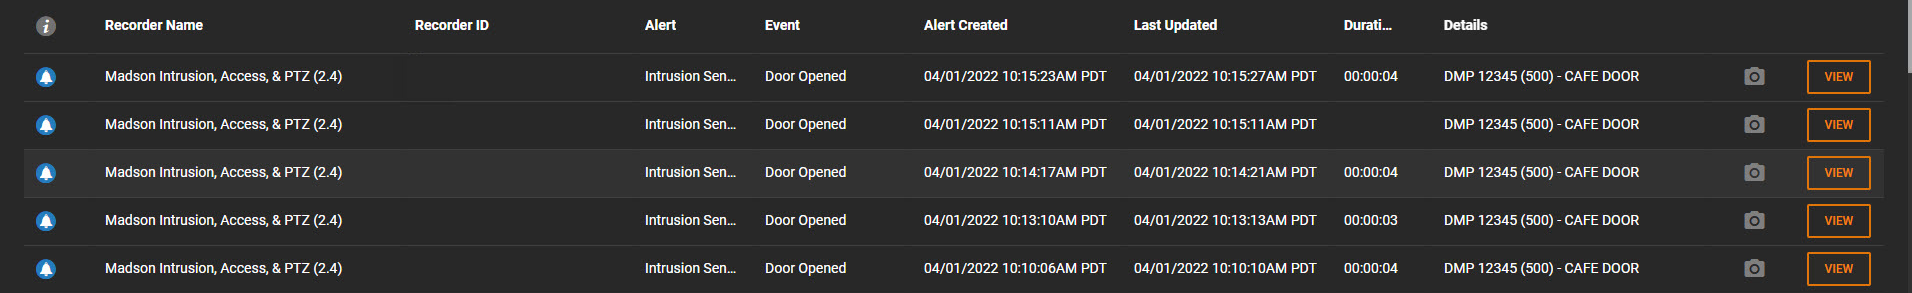 Intrusion Alert History.png